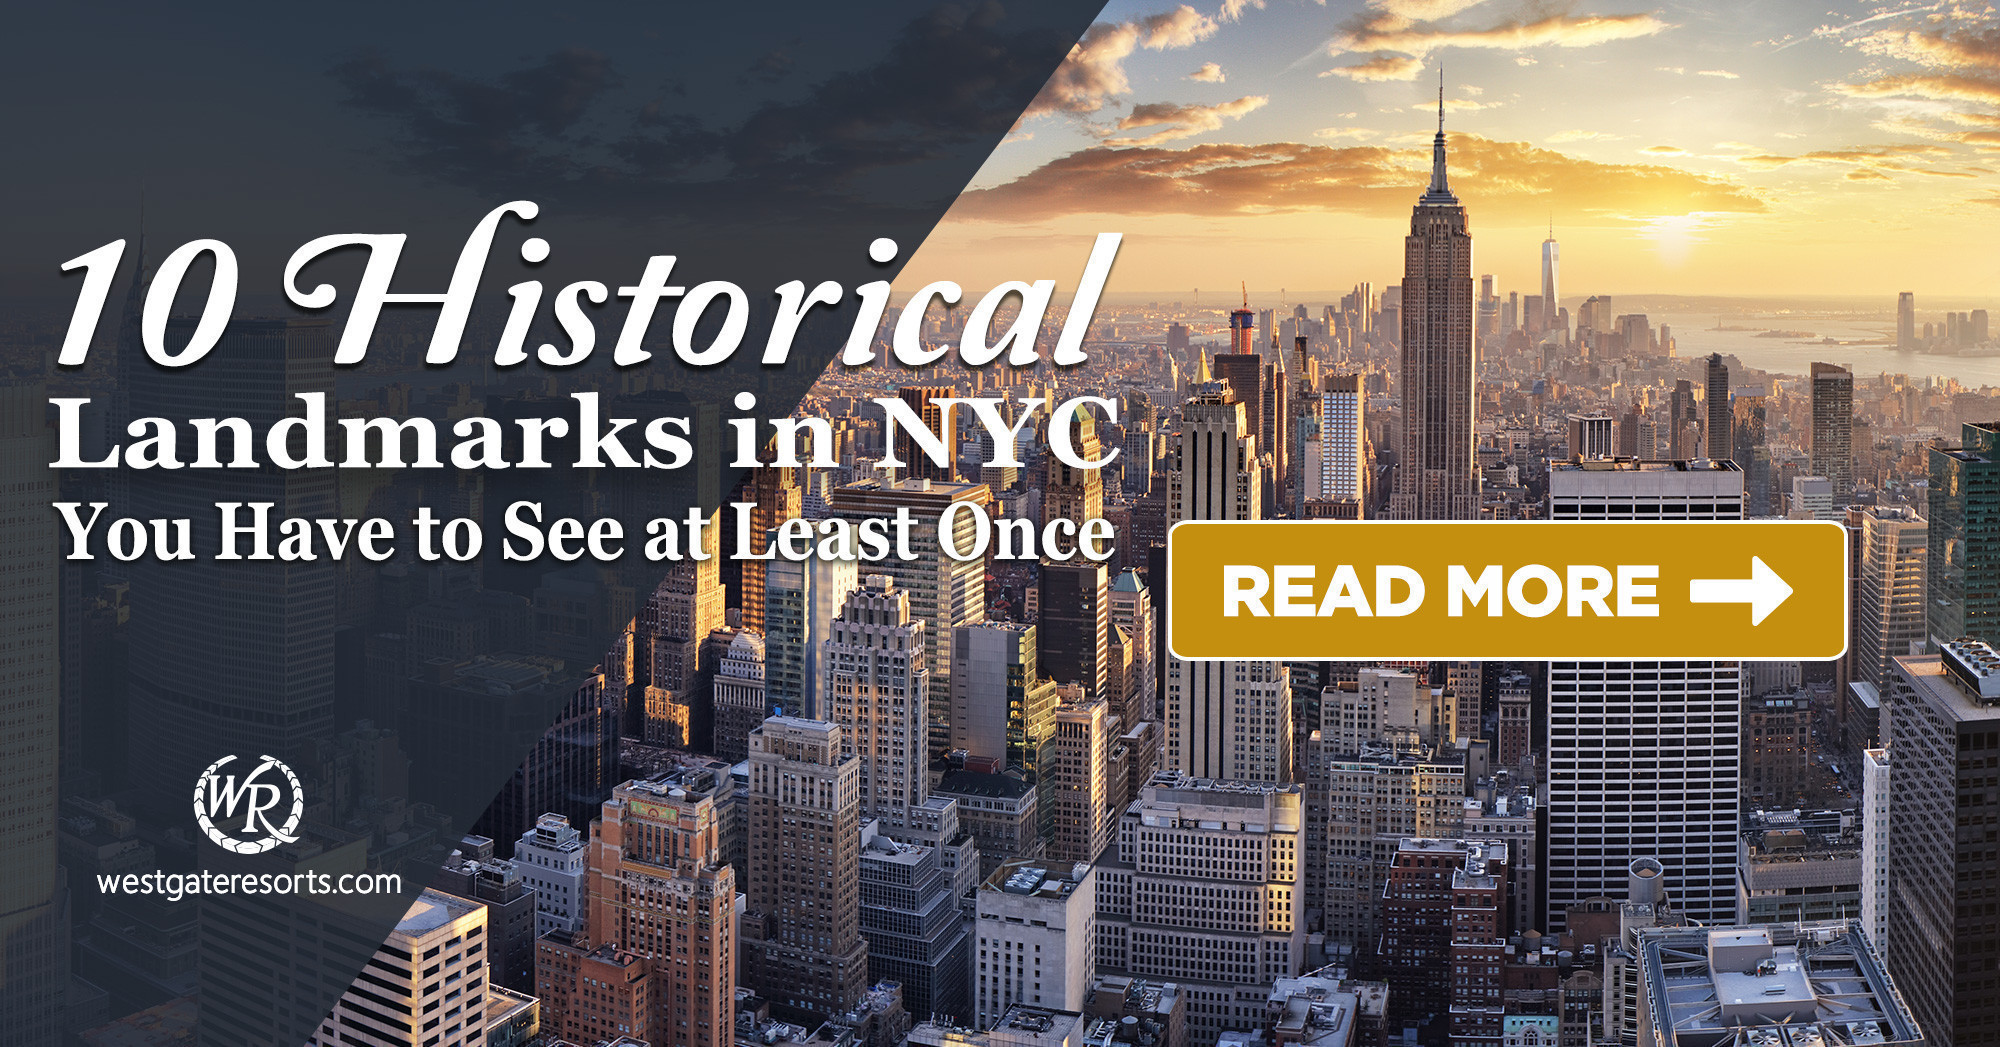 10 Historical Landmarks in NYC You Have to See at Least Once